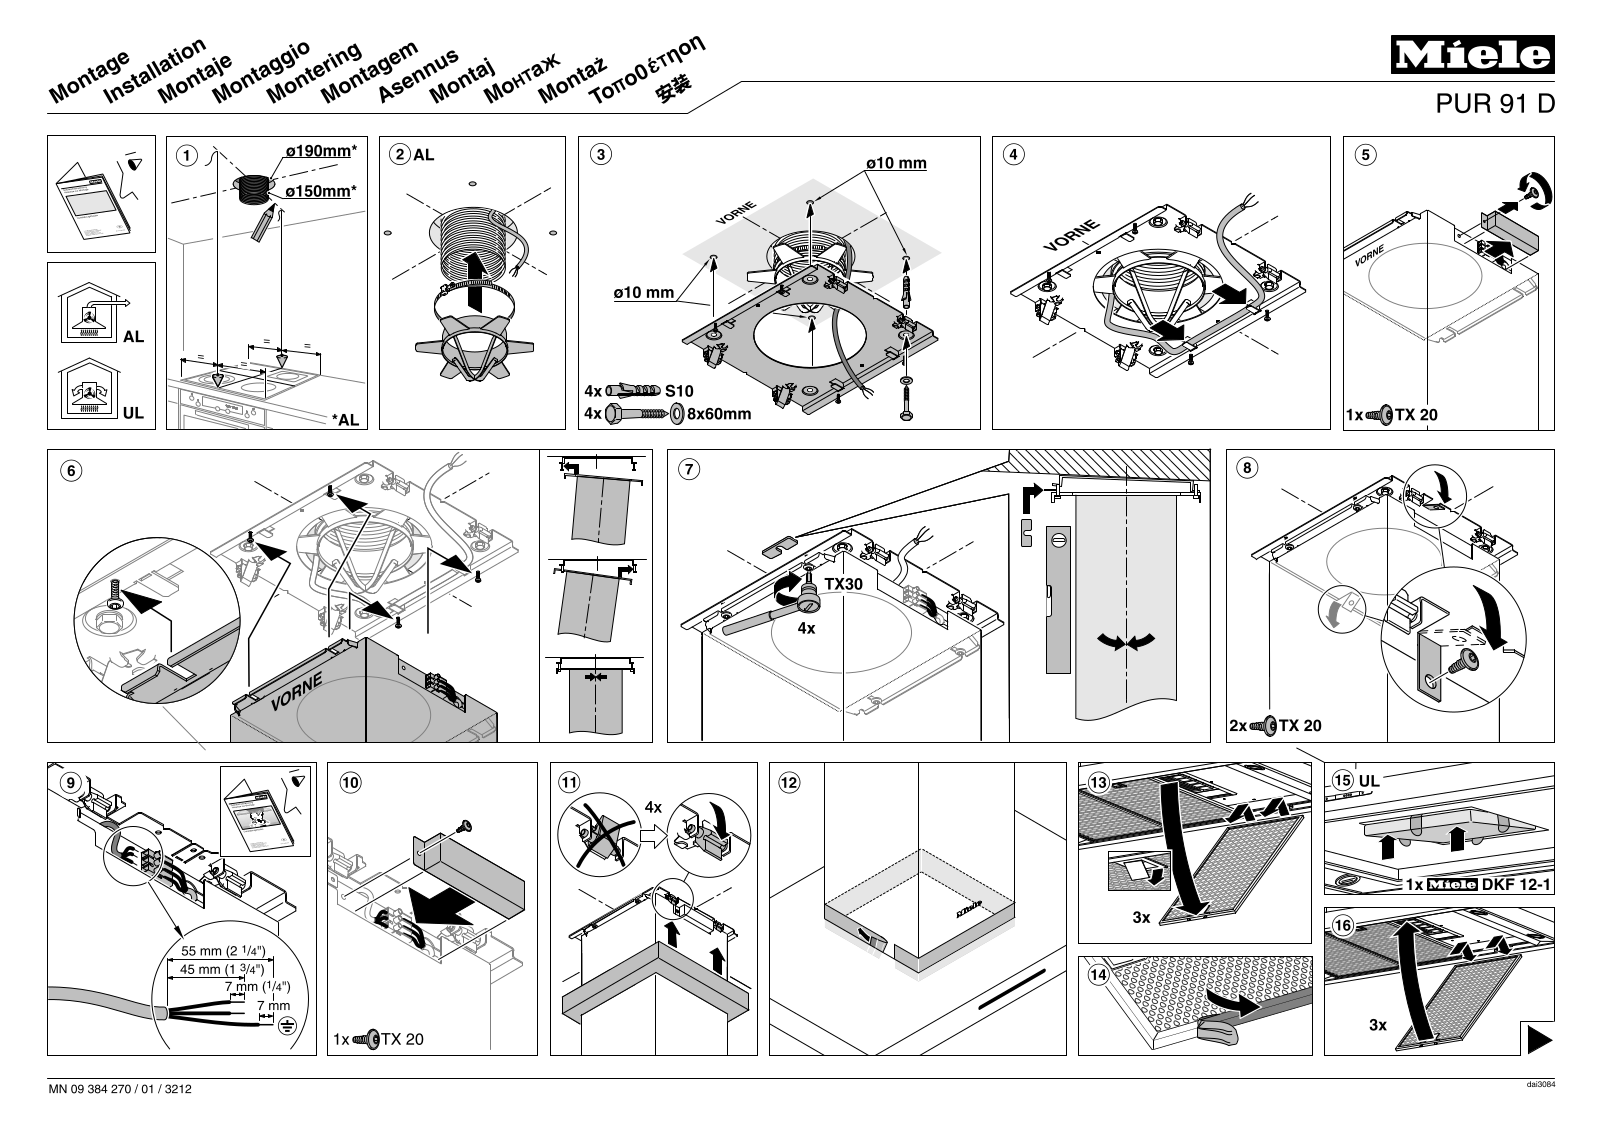 Miele PUR 91 D assembly instruction